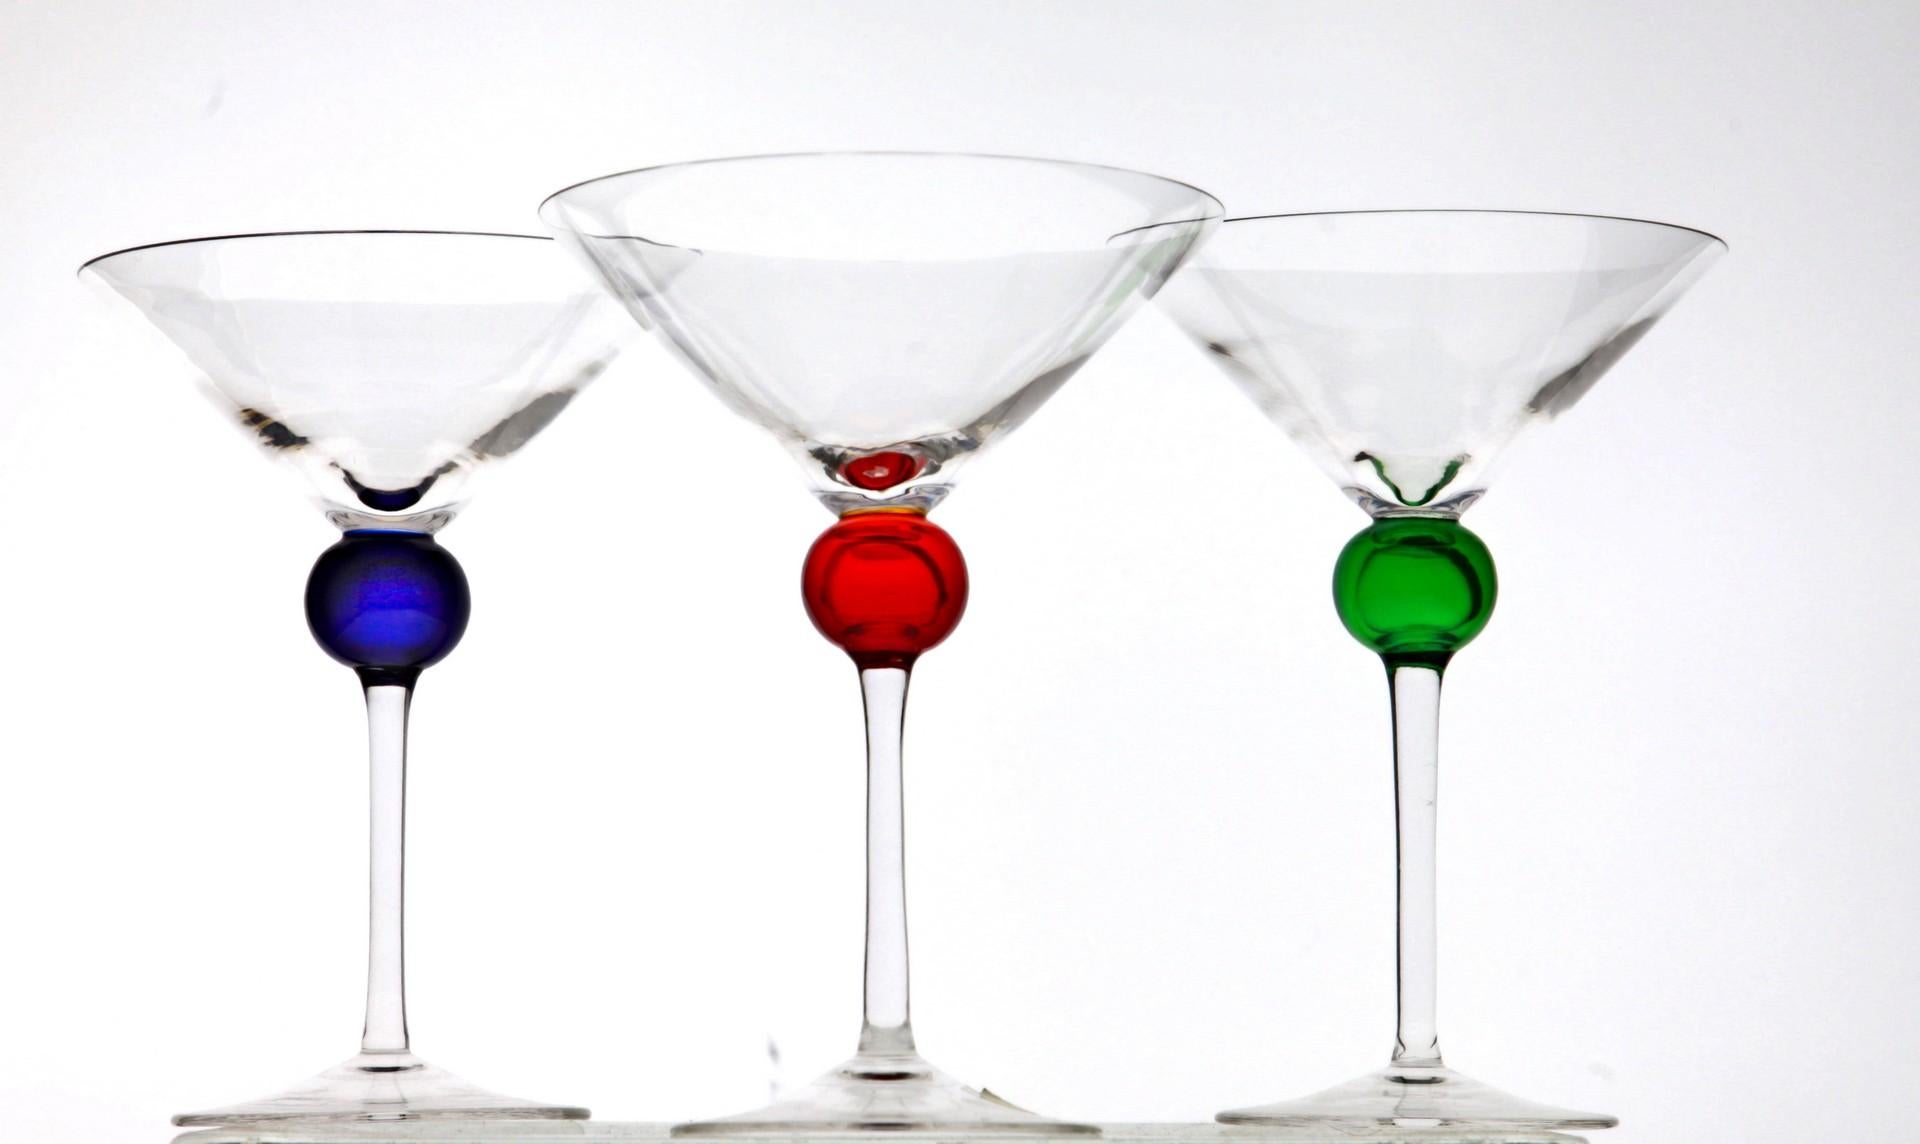 Set of 6 martini glass in clear glass from Cenedese.
The Classic conical martini shape is connected to the stem with a glass sphere in three different colors
Cobalt blue, cadmium red and green.

Very simple and elegant, with a touch of color on